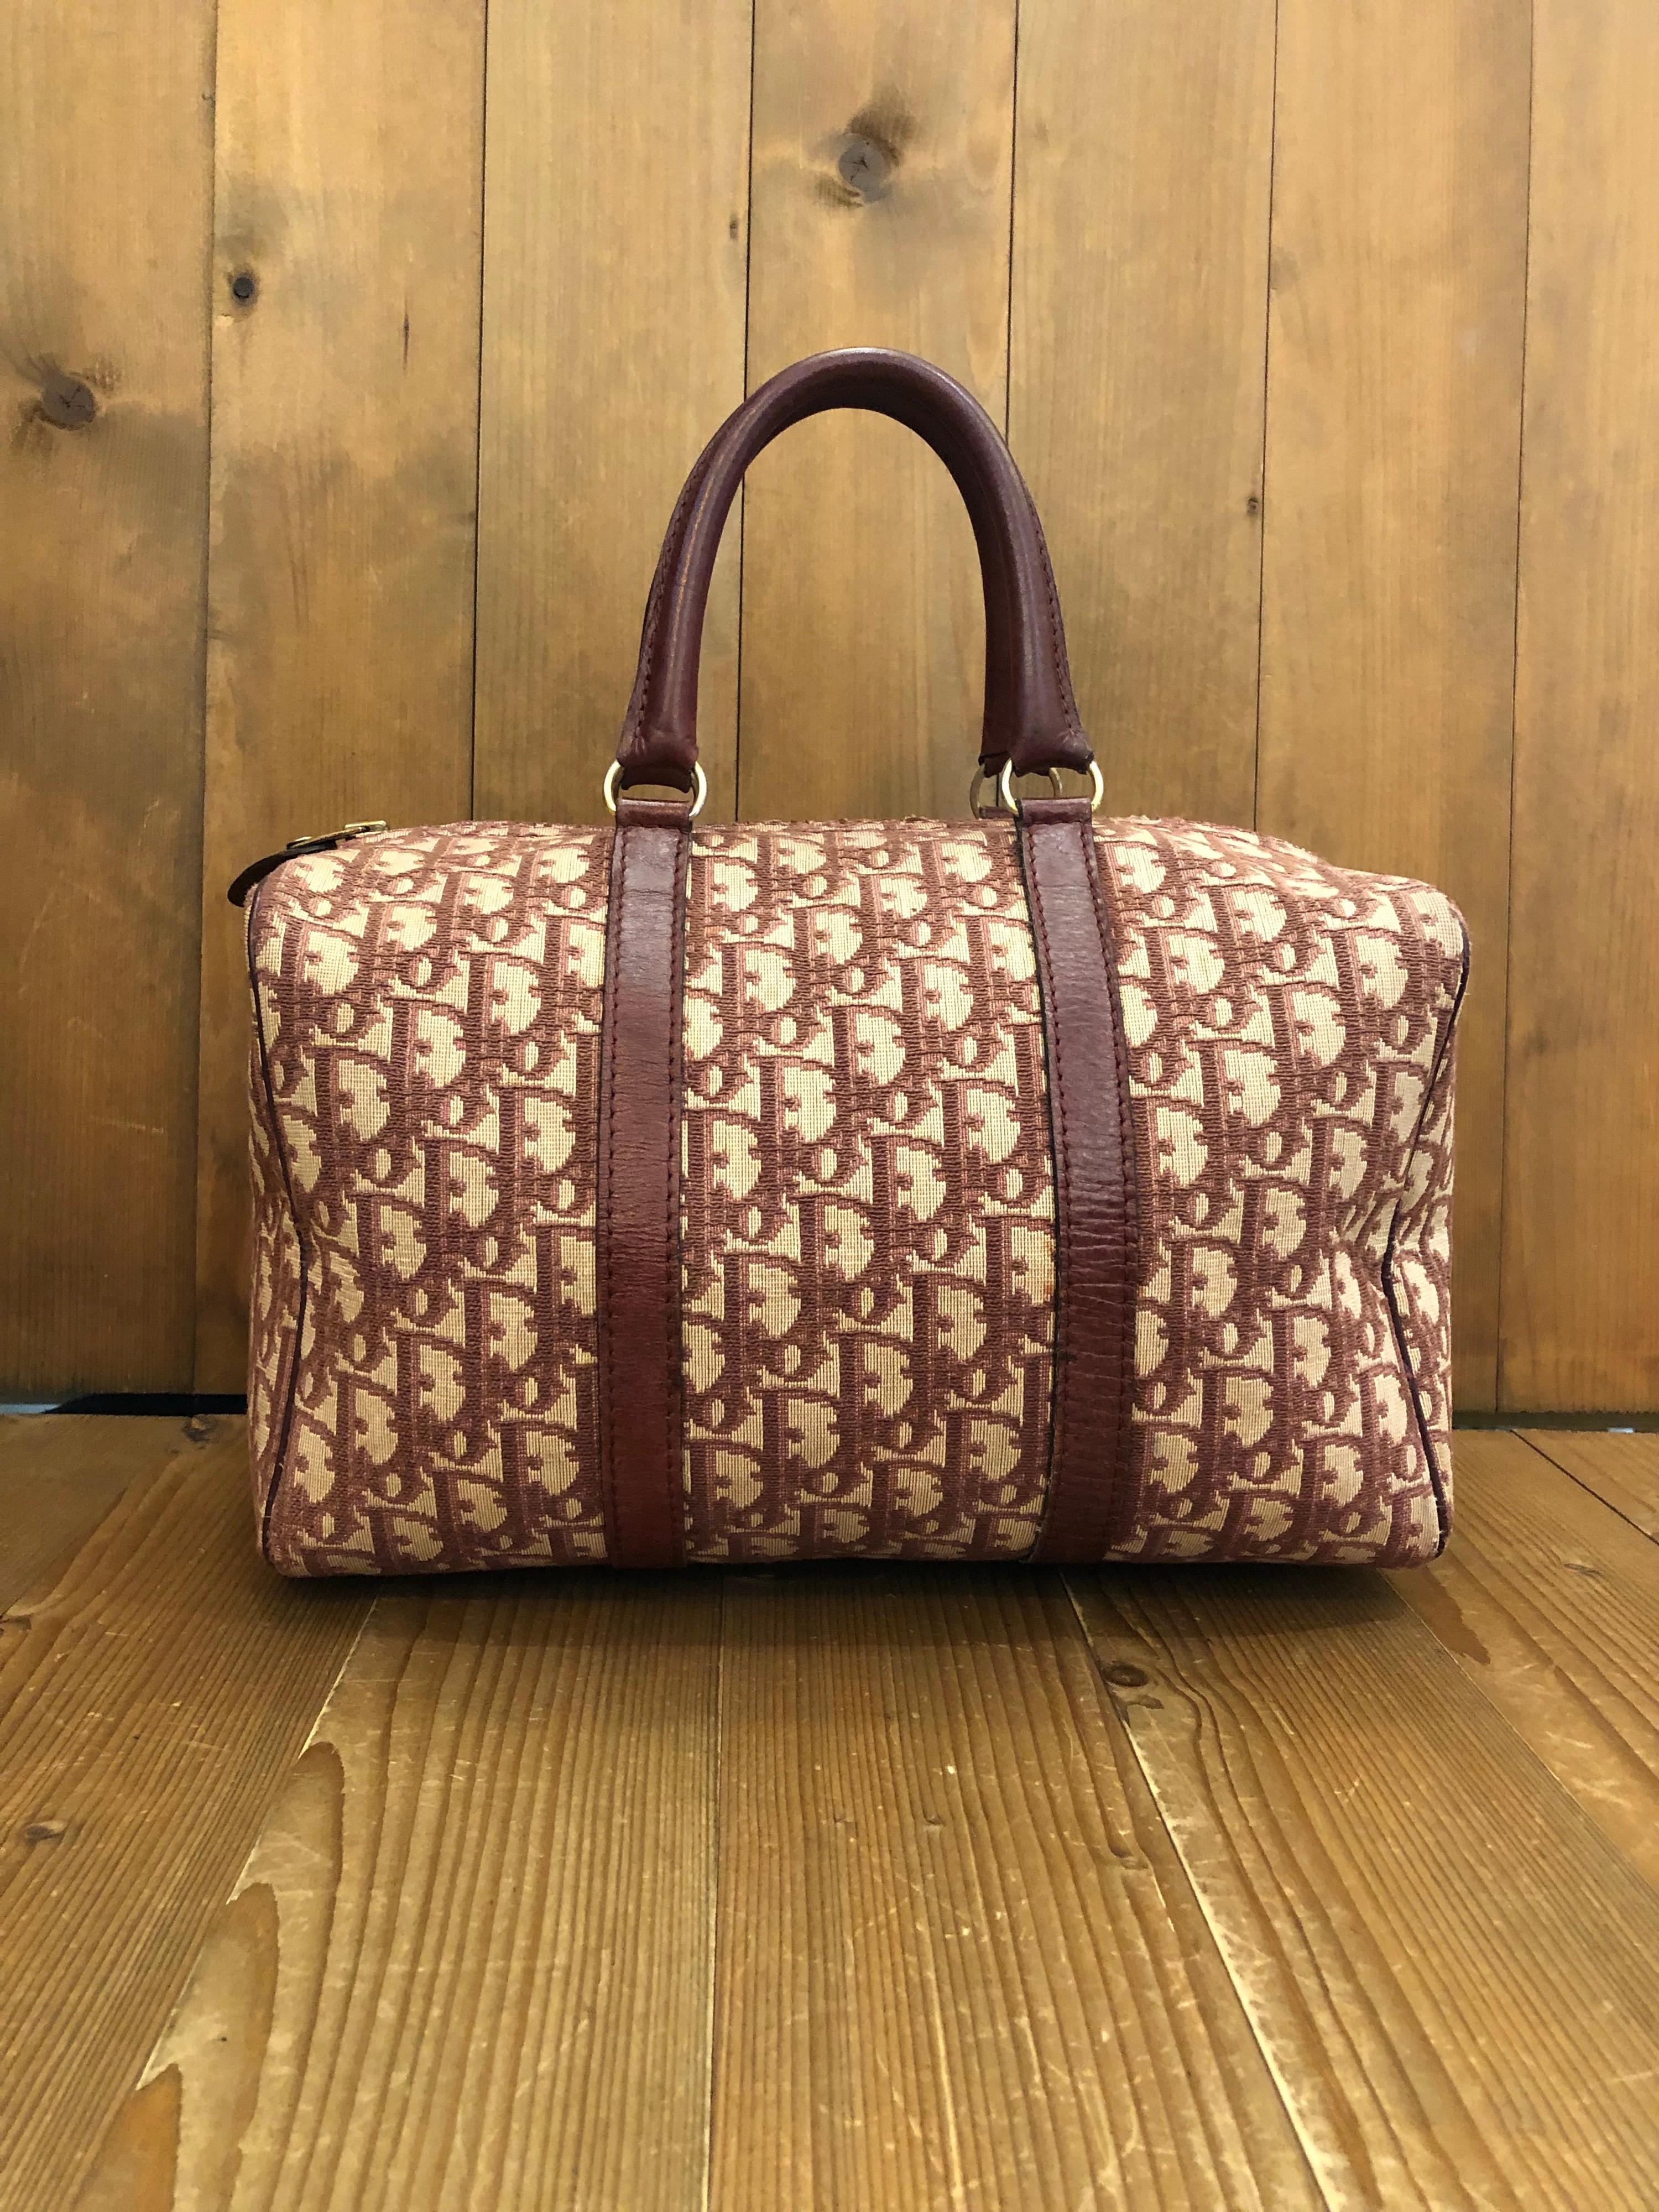 1970s CHRISTIAN DIOR Burgundy Trotter Jacquard Boston Bag 30
Material: Jacquard and leather
Color: Burgundy
Origin: France 
Measurements: 12”x7.5”x6.5”
Handle Drop. 5”
Specifications: 1 interior zip pocket 

Condition:
Outside: Minor marks on